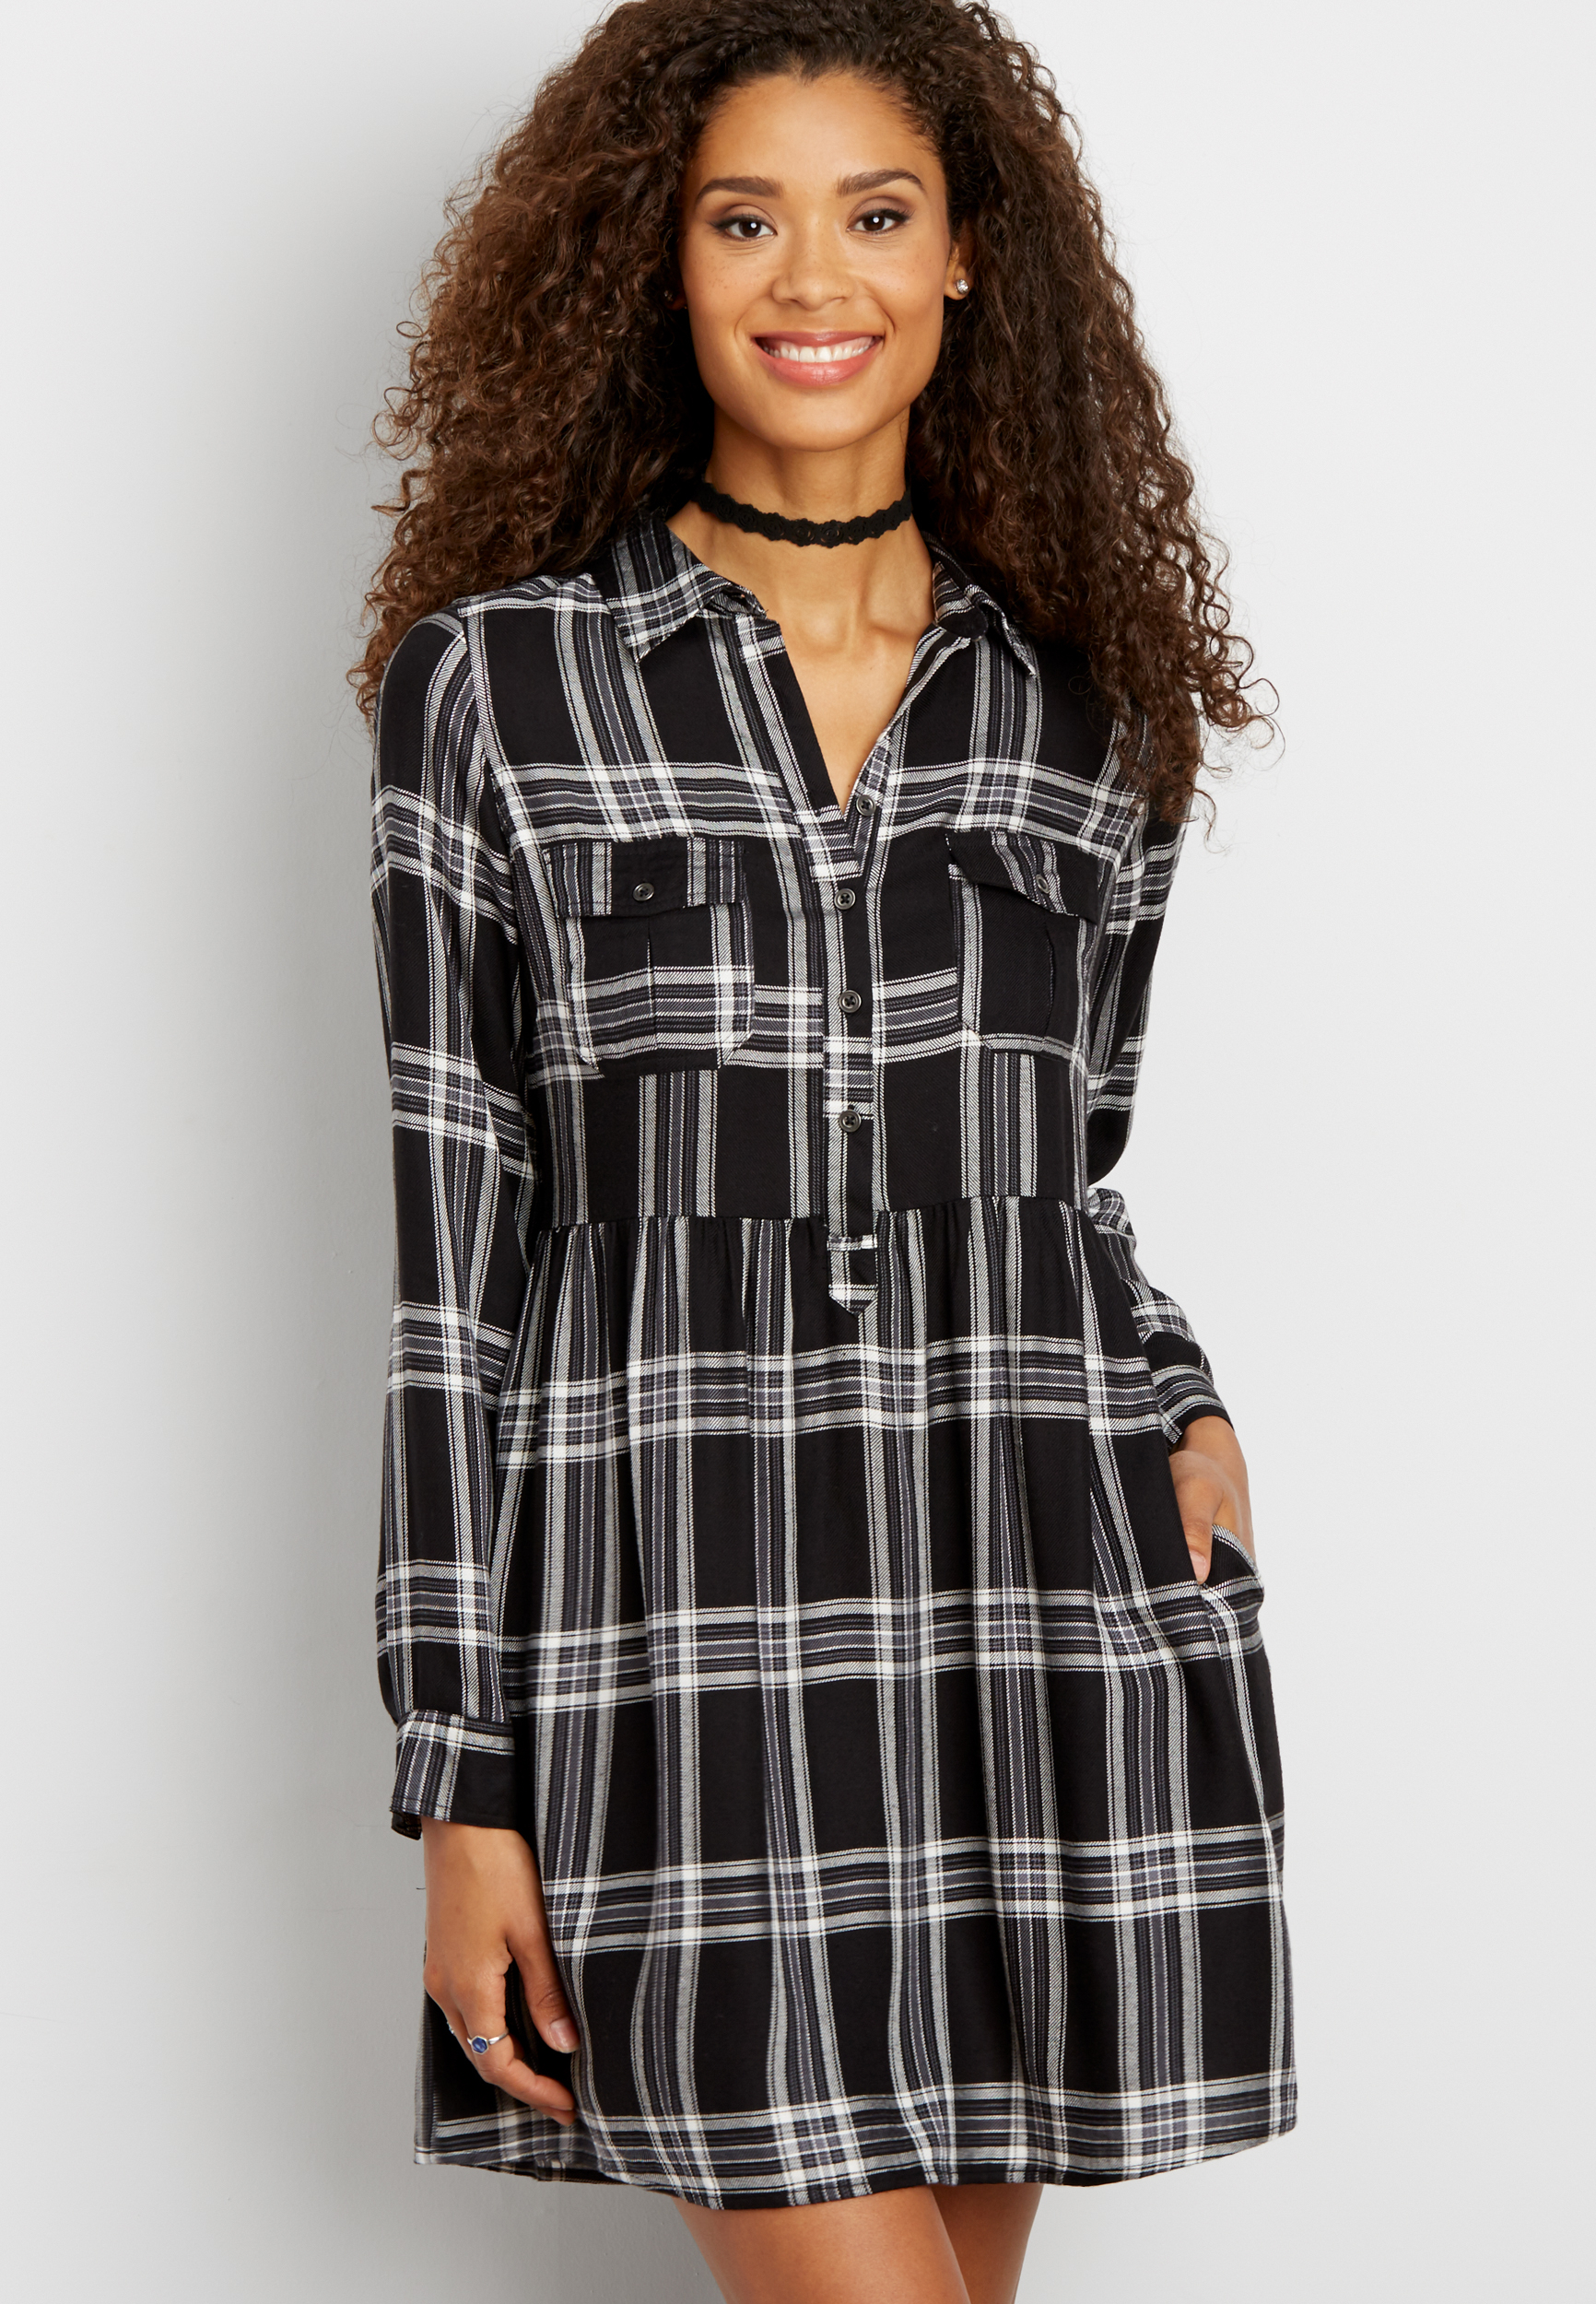 shirtdress in black and gray plaid | maurices